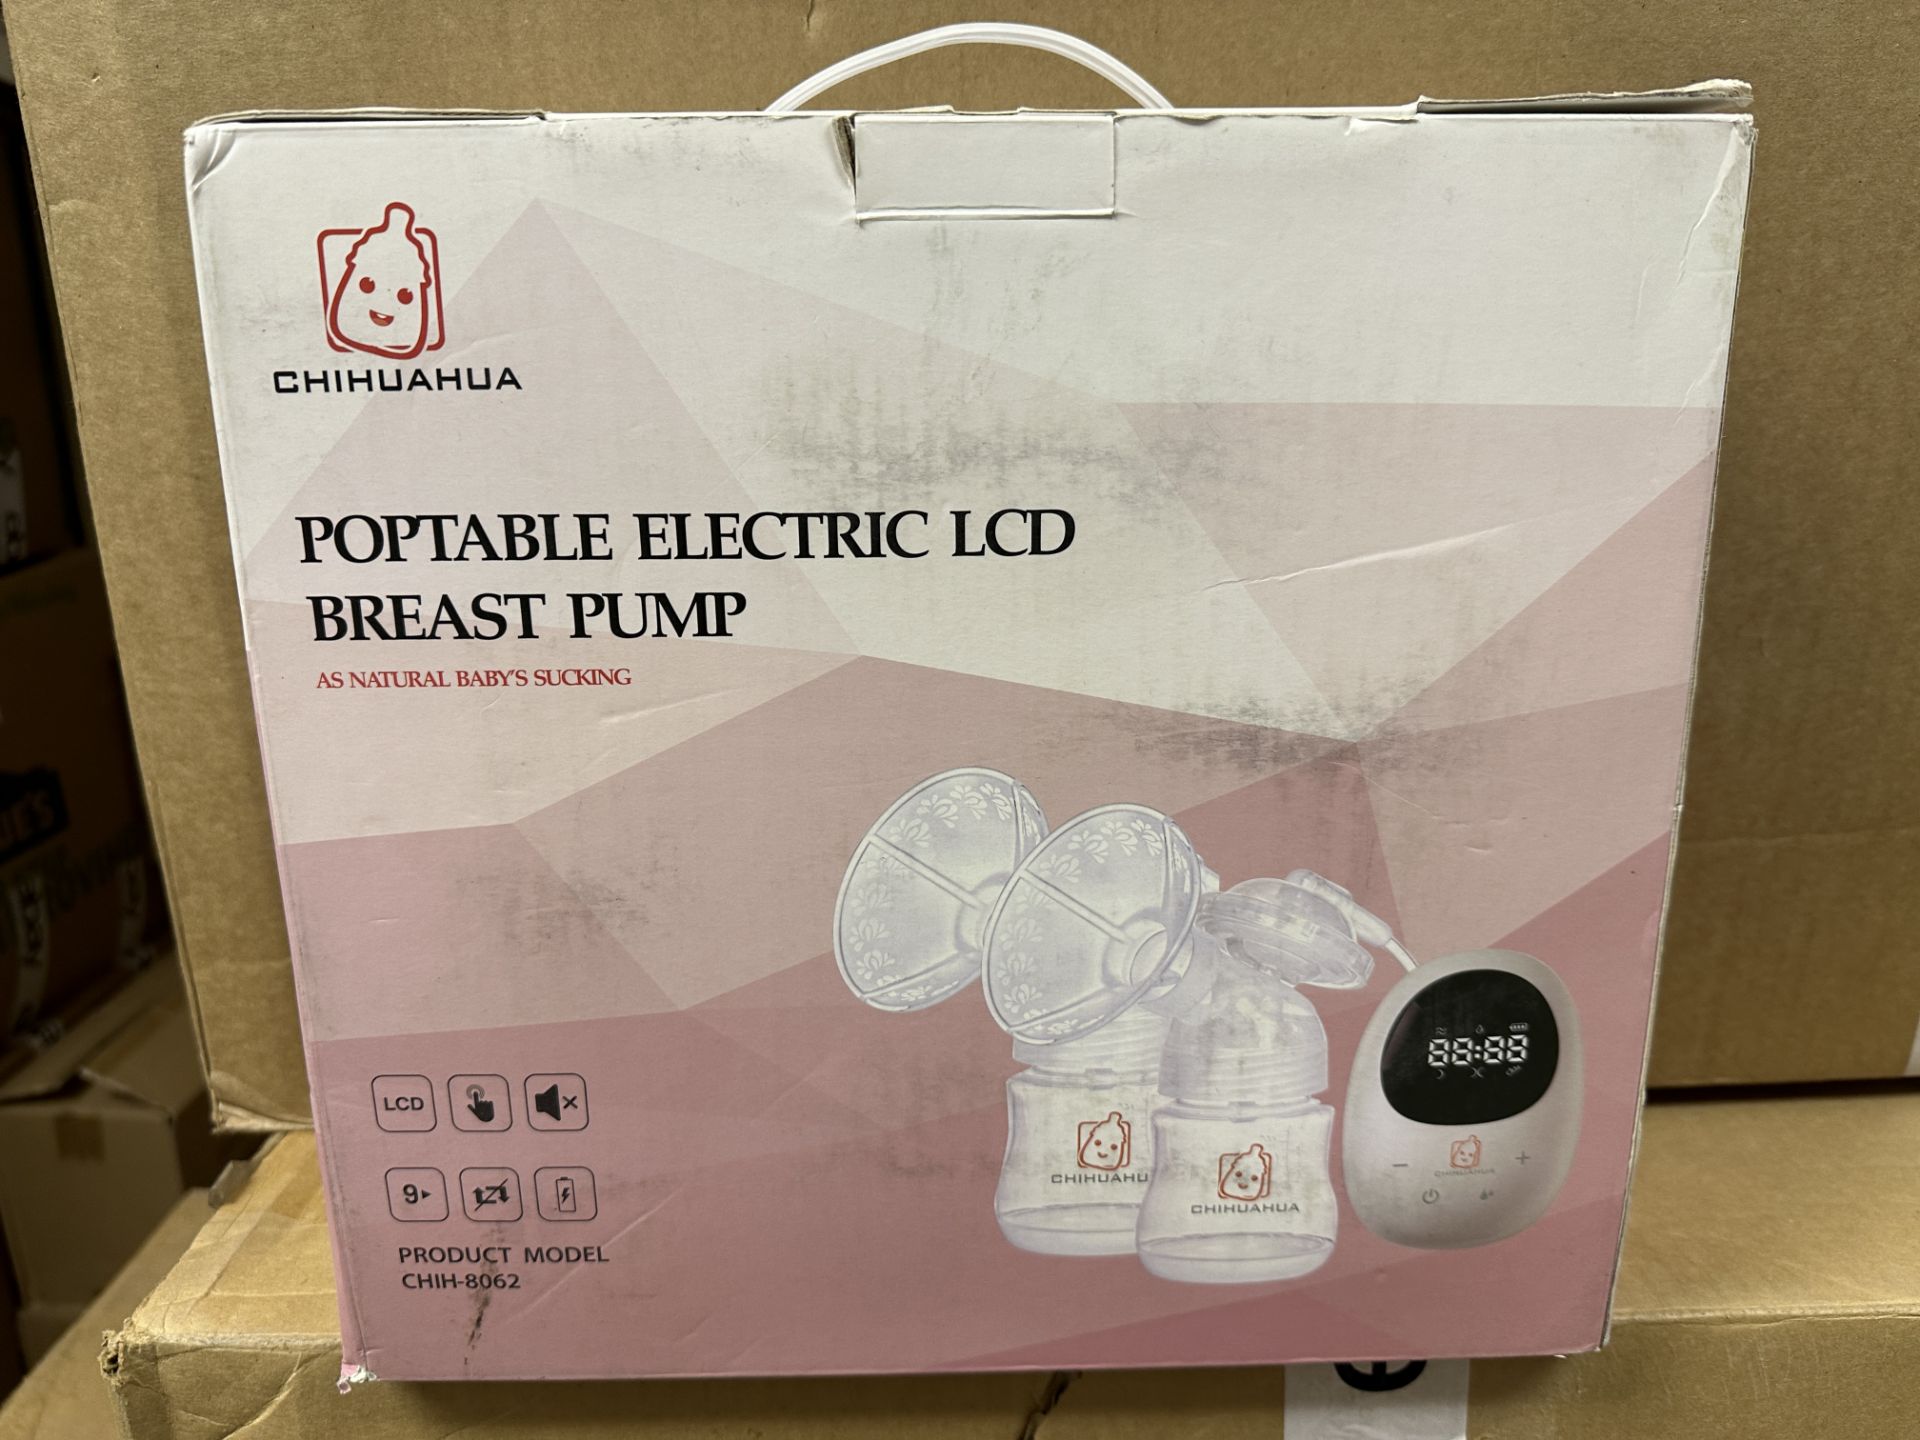 Chihuahua Popable Electric LCD Breast Pump in Box